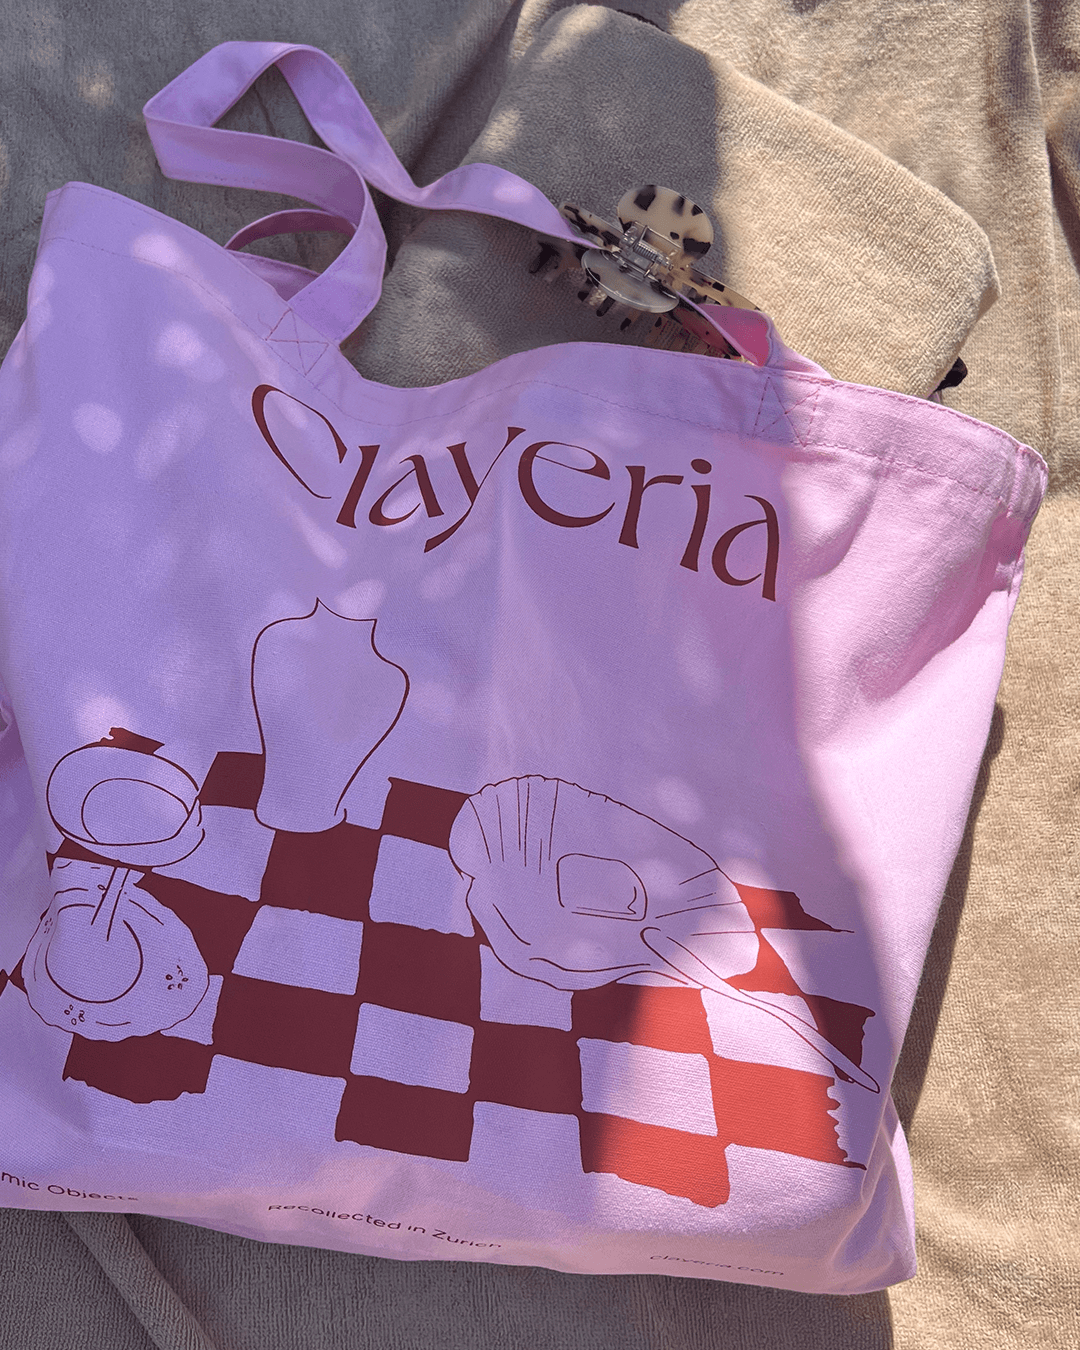 Clayeria Shopper made out of durable and thick cotton in rose and terracotta colored print.